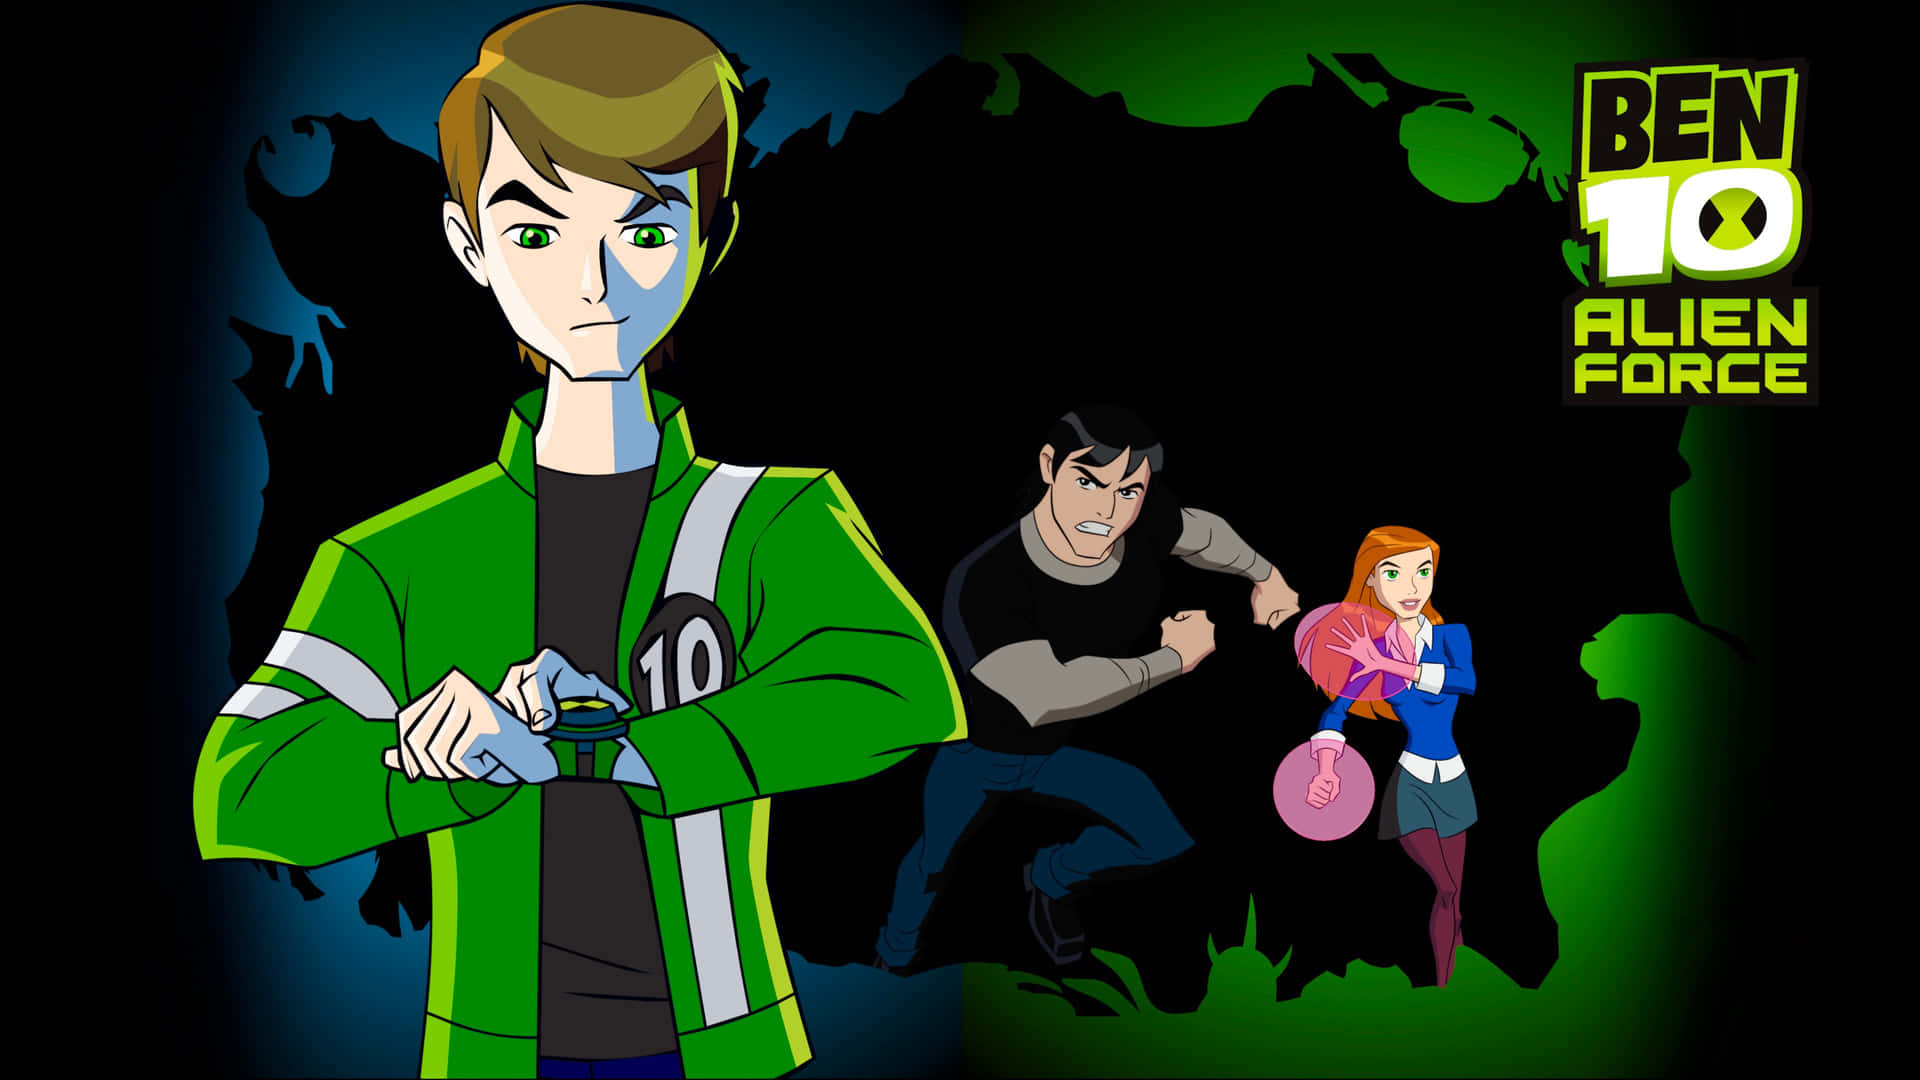 Welcome to the amazing world of Ben 10!